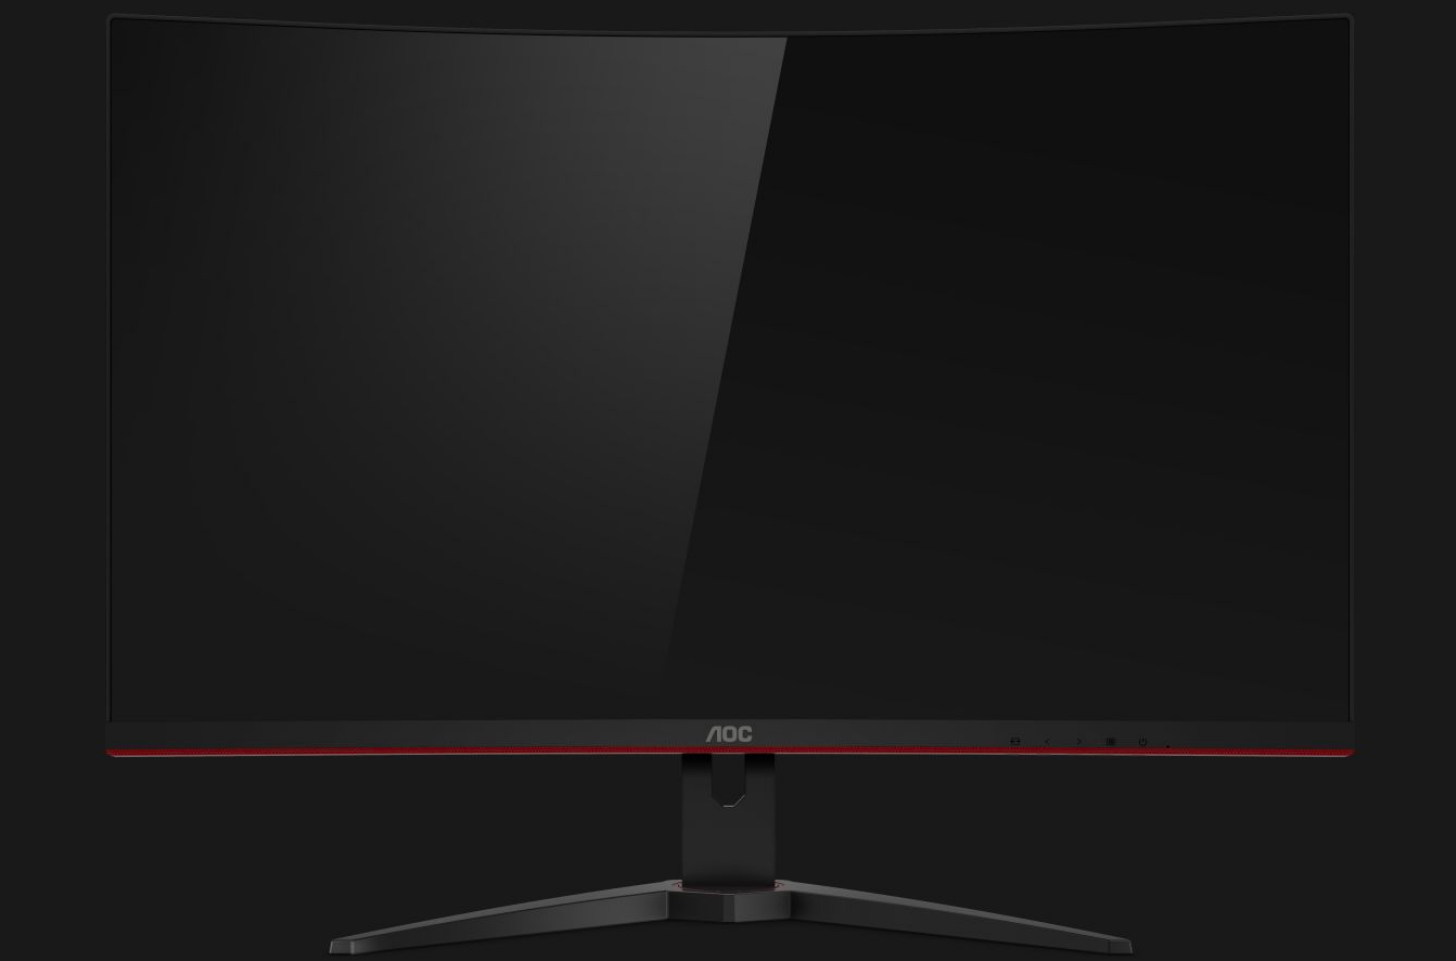 Aoc Unveils Cheap G1 Series Curved Displays With 144 Hz Freesync Starting At 280